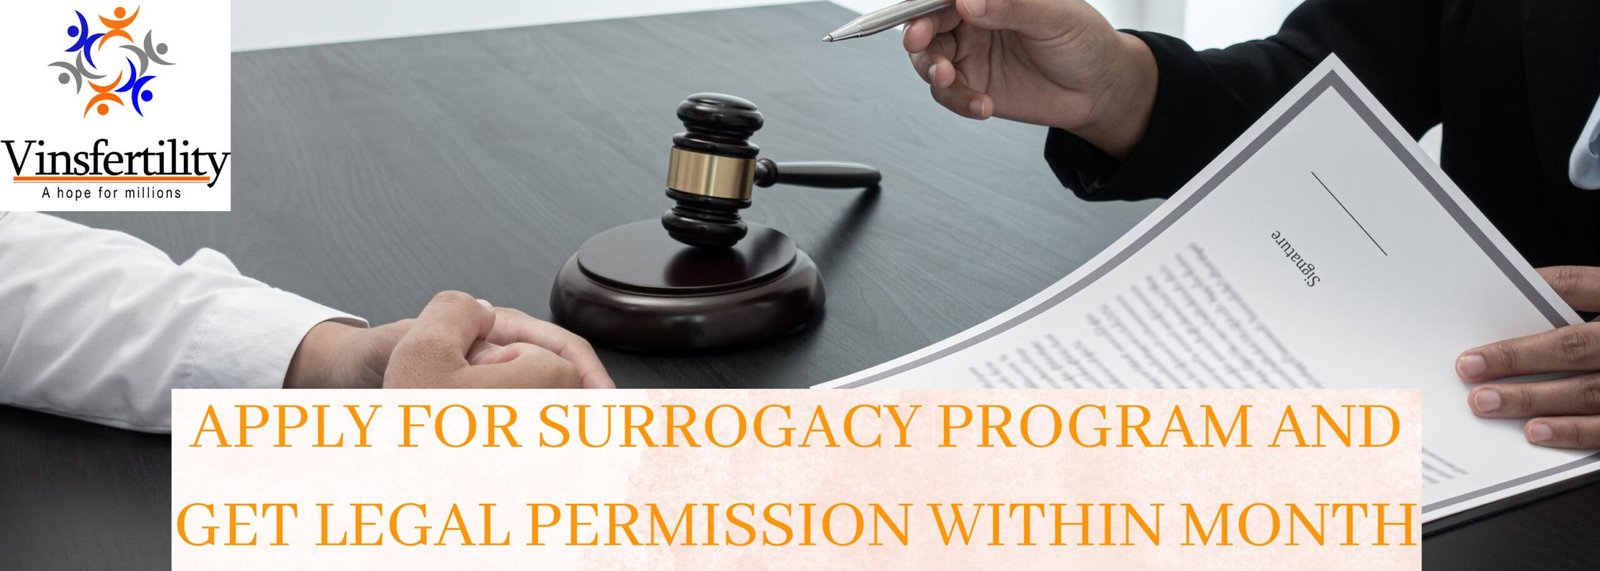 Surrogacy program and how to apply to get legal permission